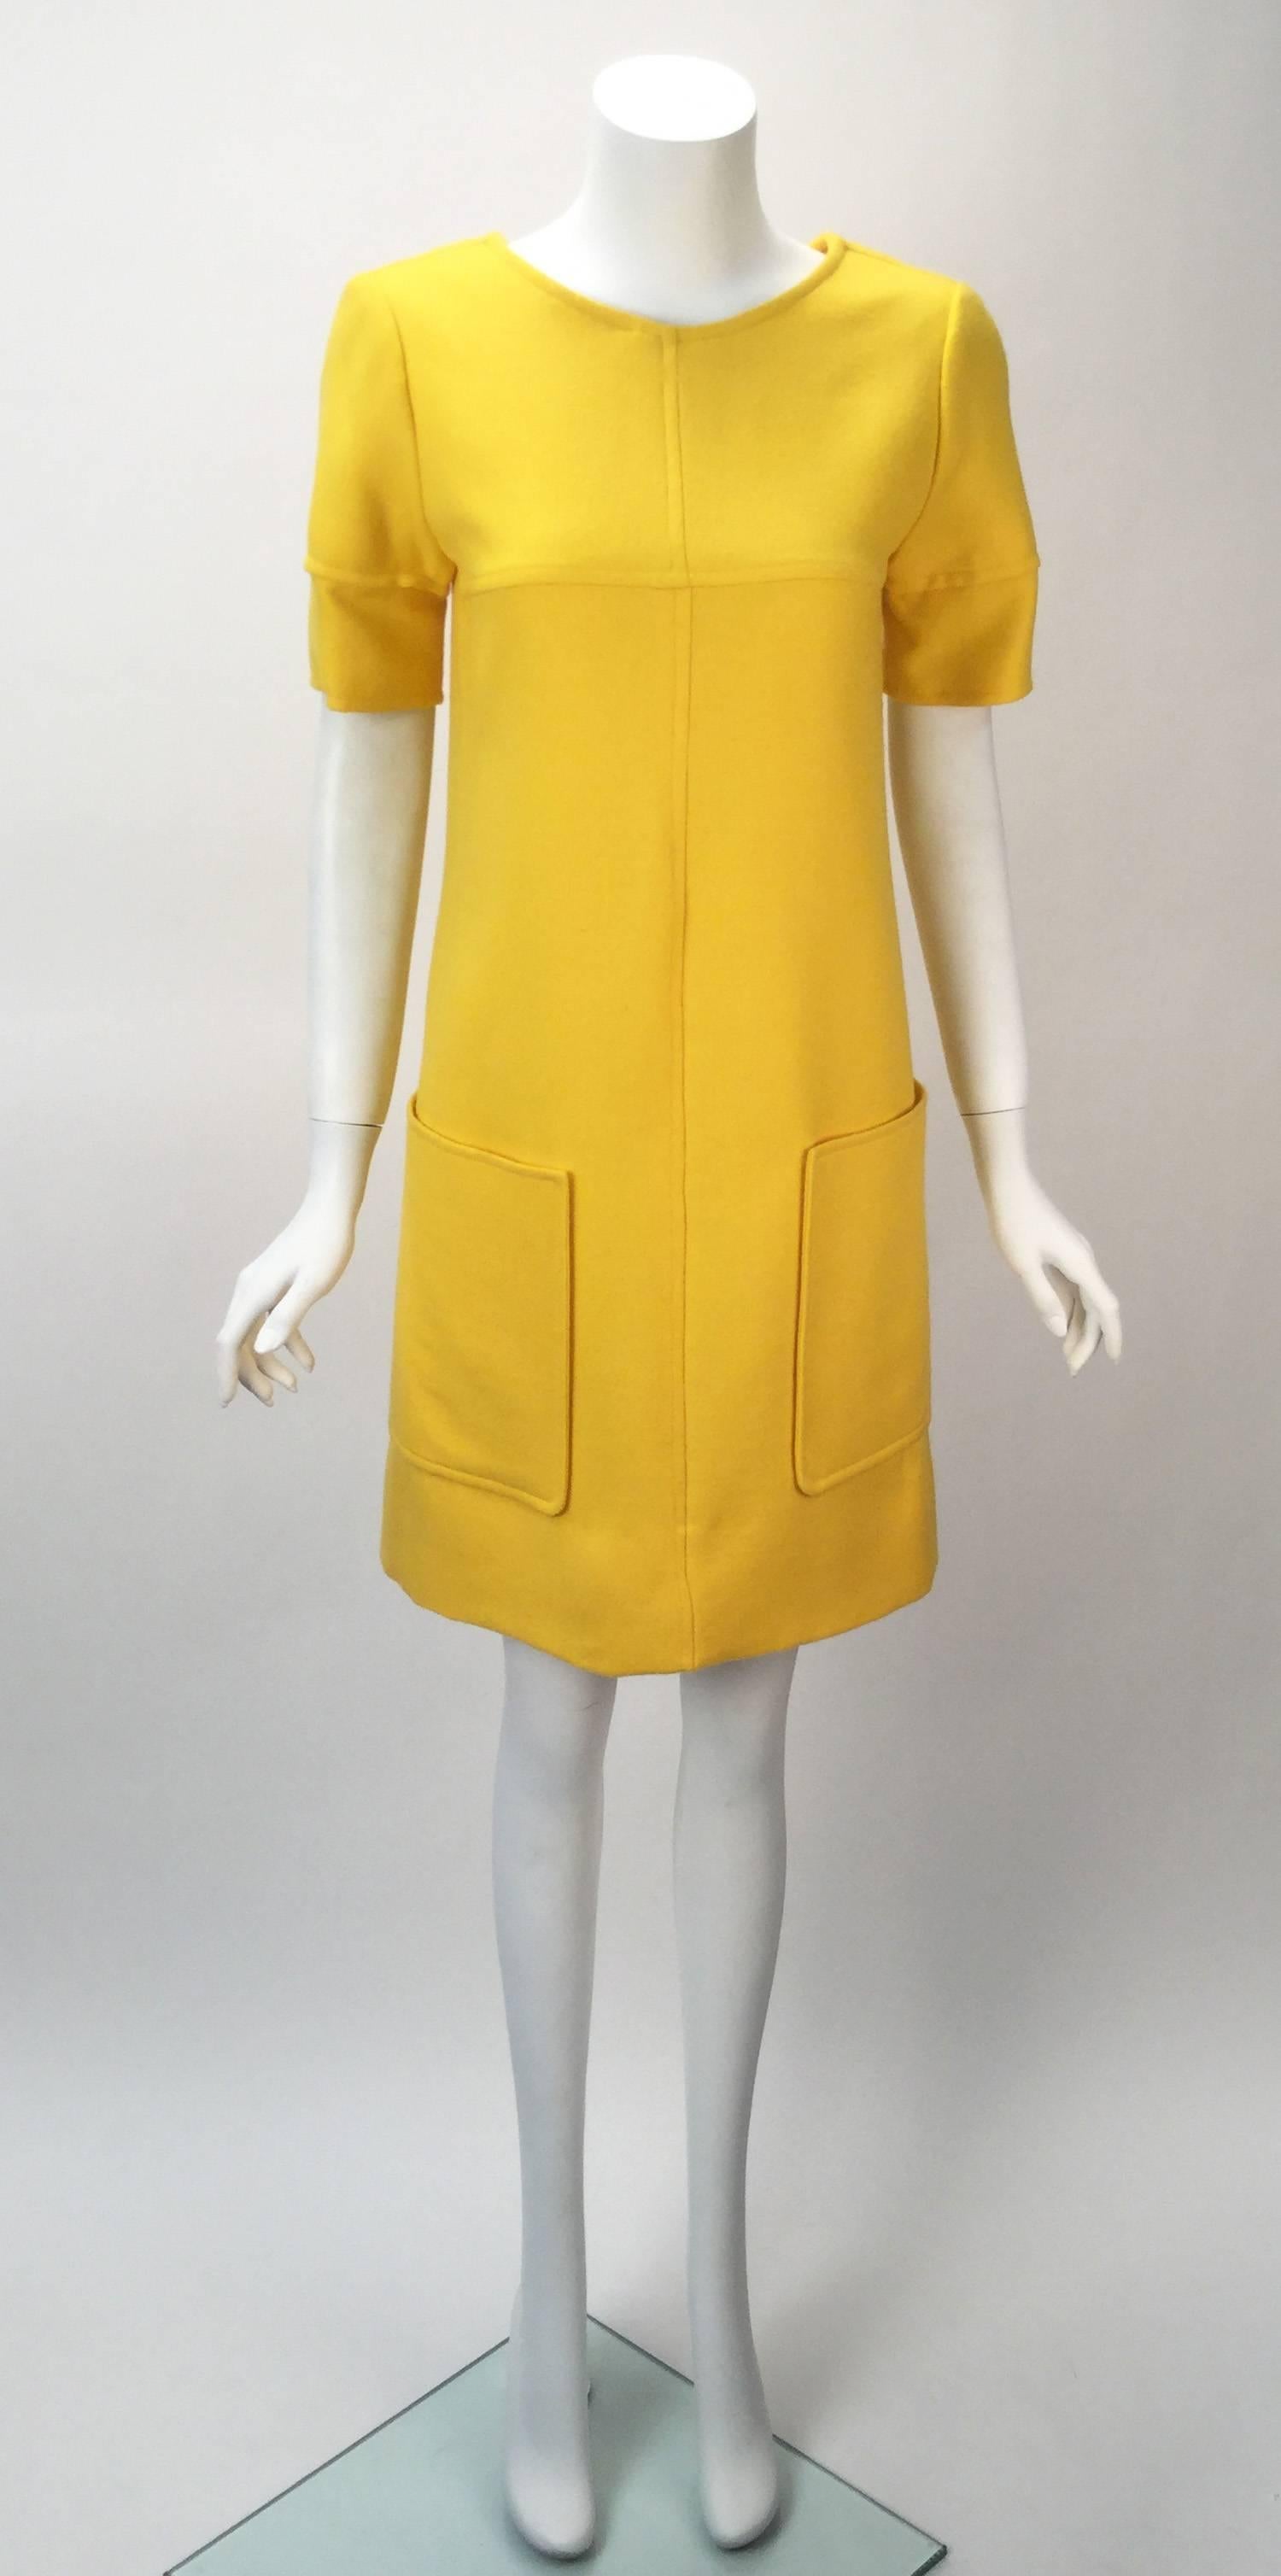 Awesome 1980's Courreges Yellow Dress And Cropped Jacket Ensemble. Dress has two large pockets. Seam going from neck to hem as well as across the bust. Sleeves feature the same seam. Zipper center back. 3" inch hem on bottom of dress.